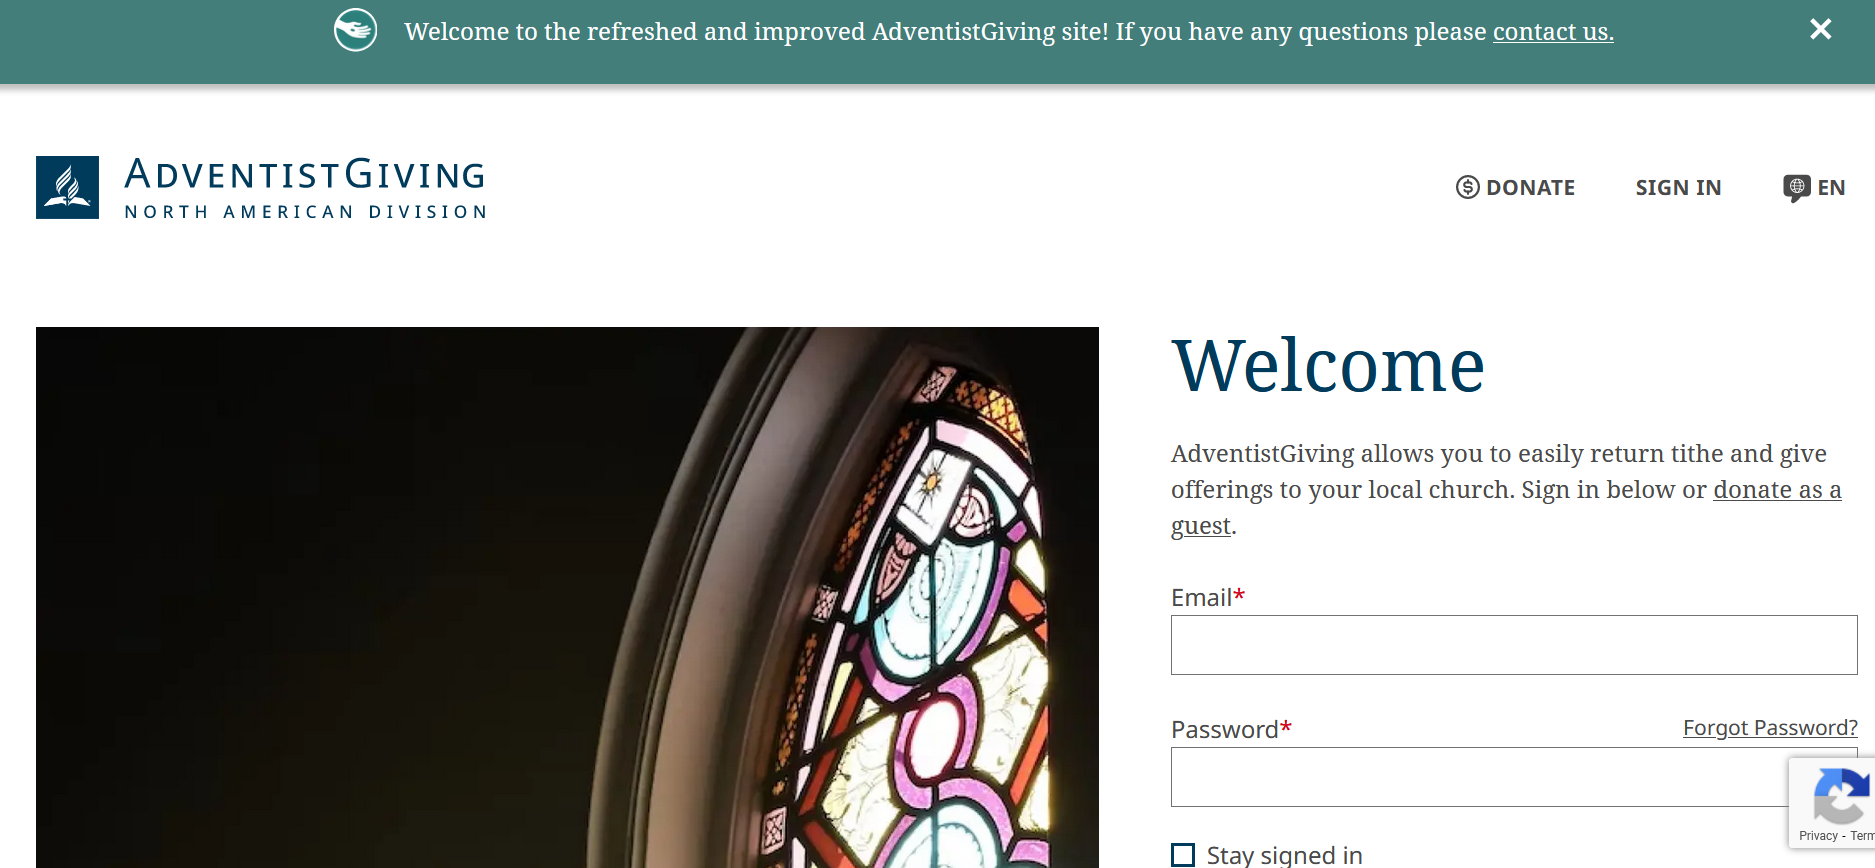 Refreshed and Improved AdventistGiving Website Coming Later this Month